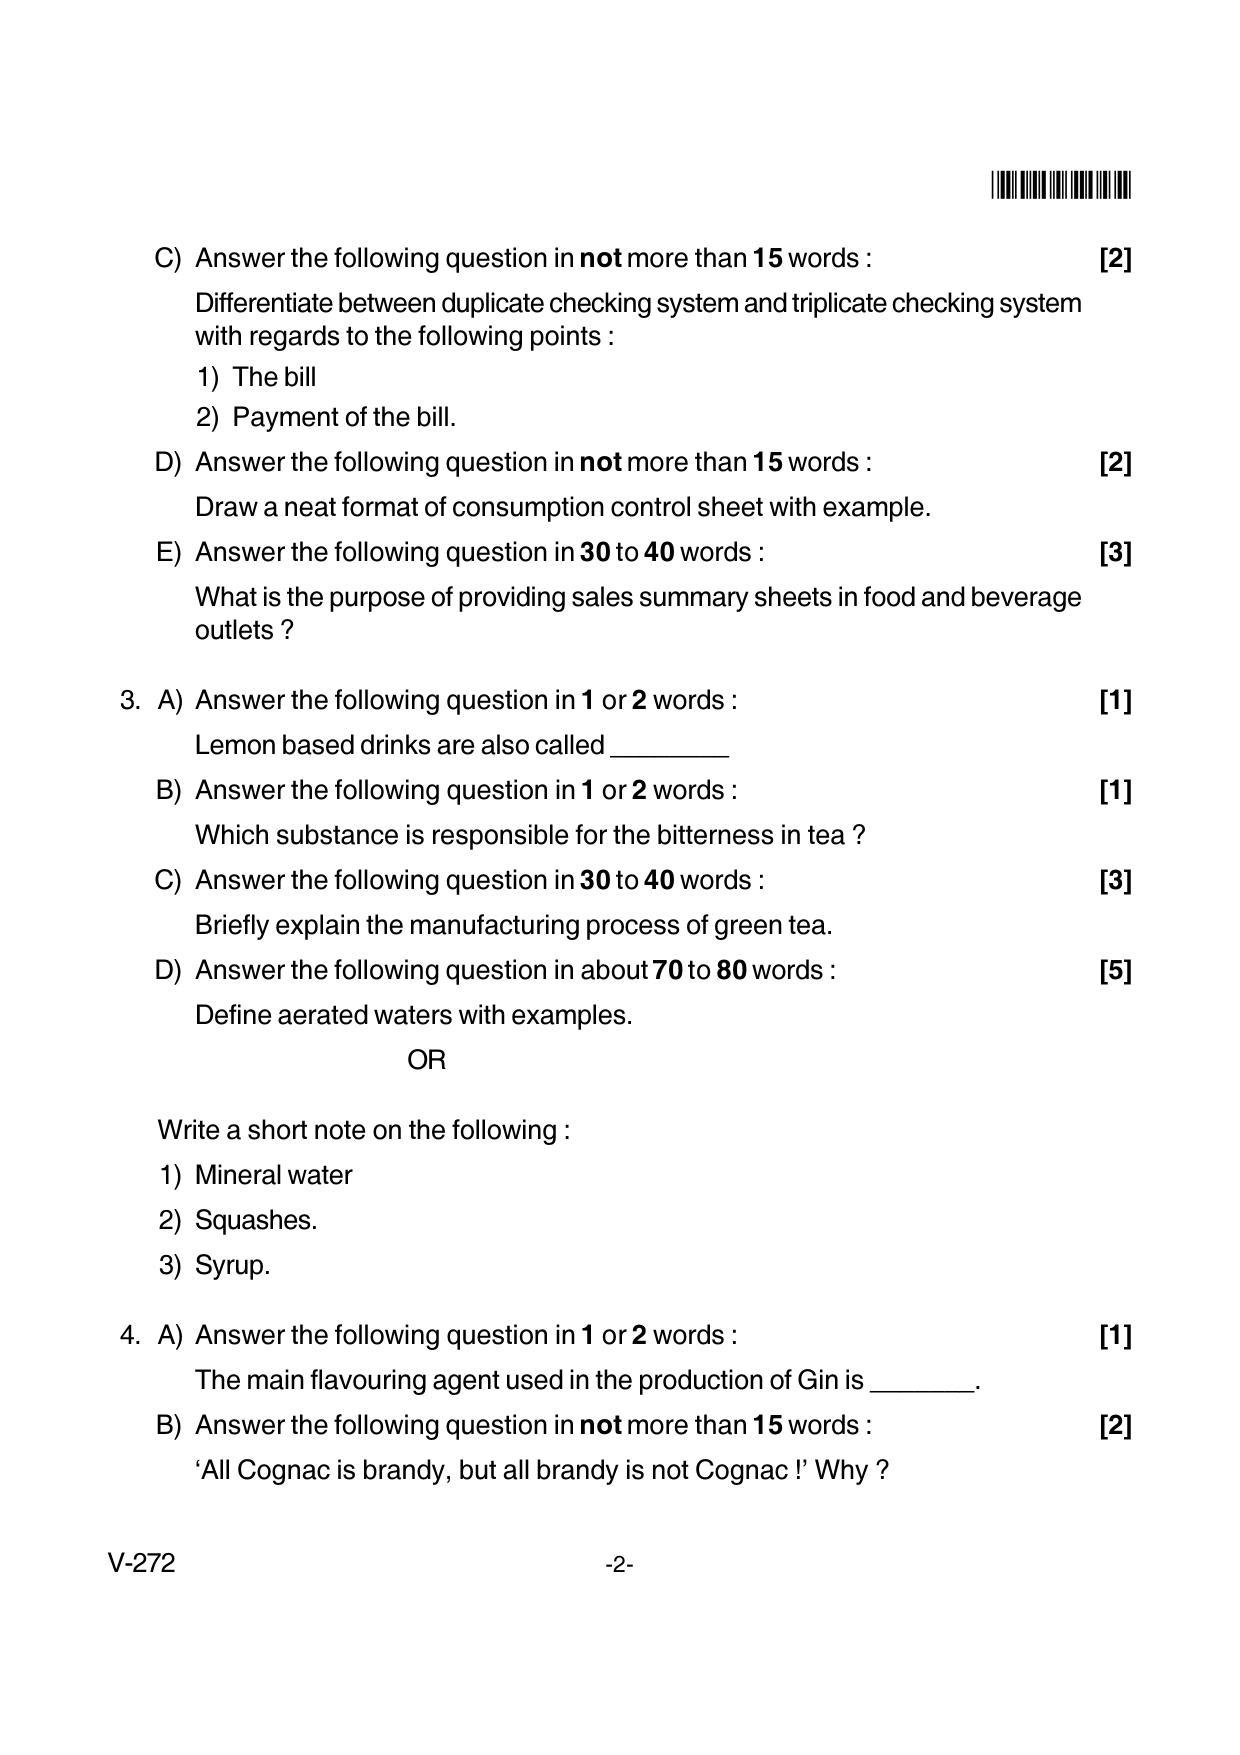 Goa Board Class 12 Food & Beverage Service  Voc 272 Old Pattern (March 2018) Question Paper - Page 2